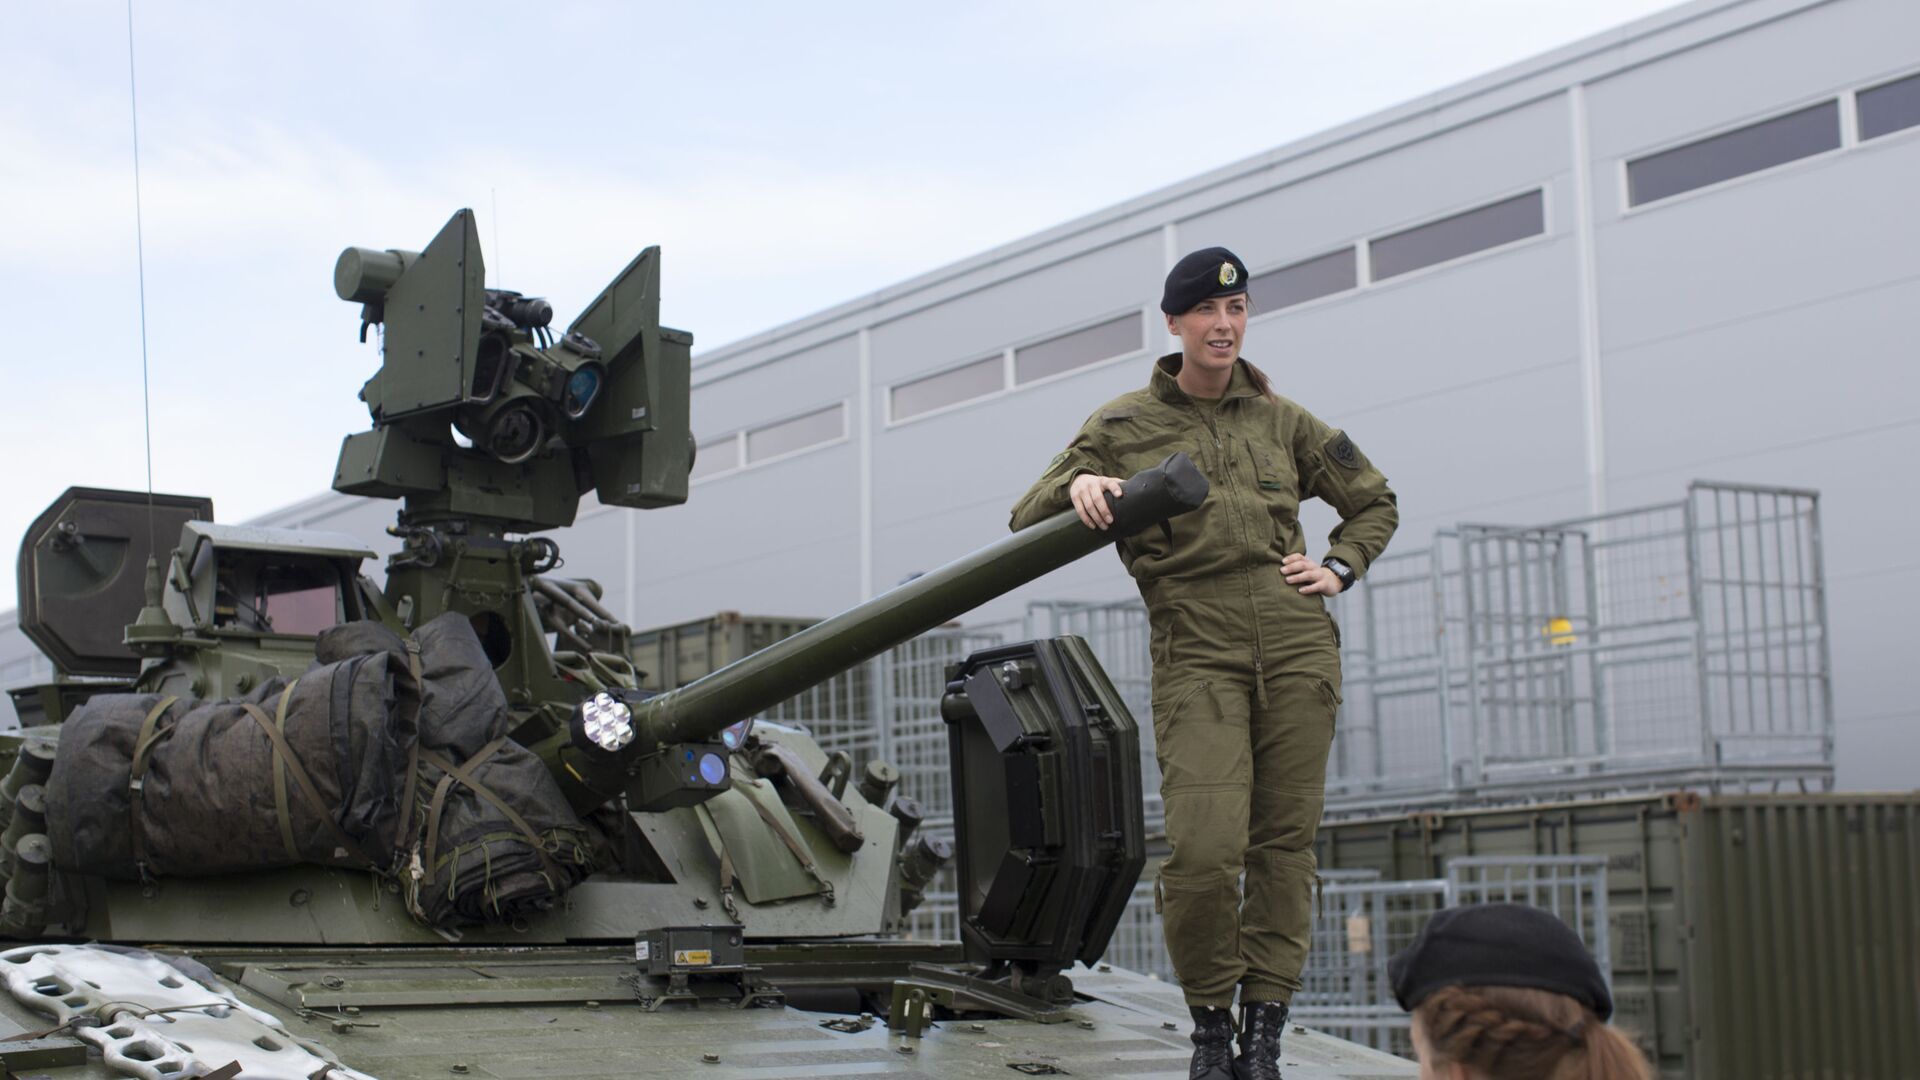 Female soldiers talk next to a CV90 combat vehicle at the armored battalion in Setermoen, northern Norway on August 11, 2016. Norway has become the first NATO member to have compulsory conscription for women as well as men in the army. Recently, the first batch of army recruits joined the ranks in The Armored Battalion in the Norwegian Army located in Setermoen in northern Norway.  - Sputnik International, 1920, 29.08.2022